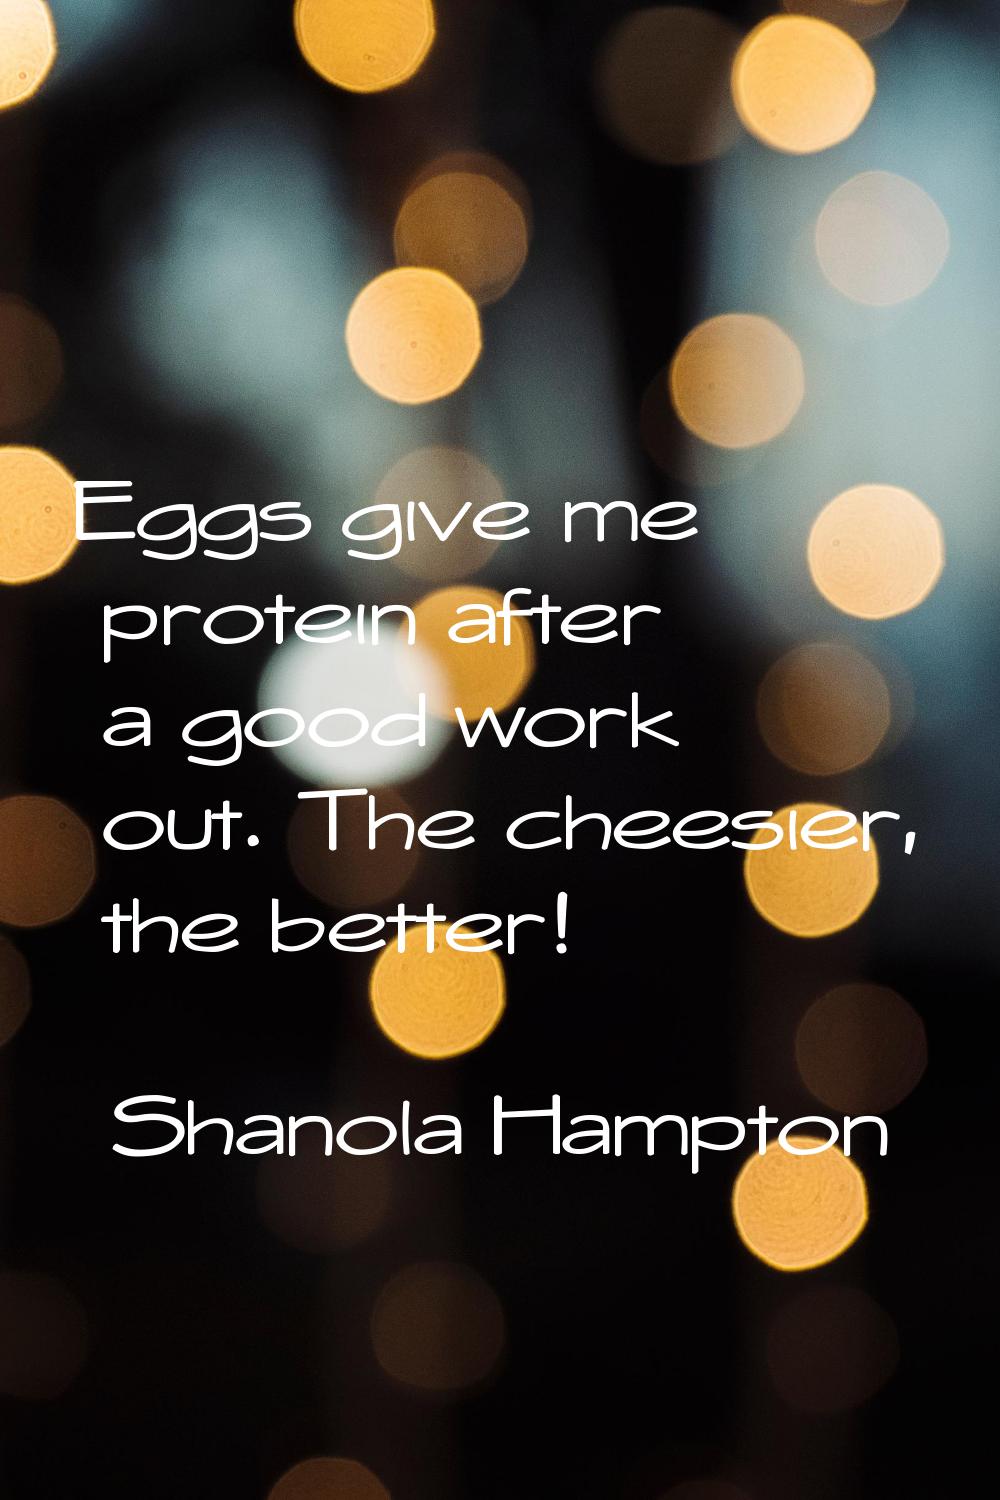 Eggs give me protein after a good work out. The cheesier, the better!